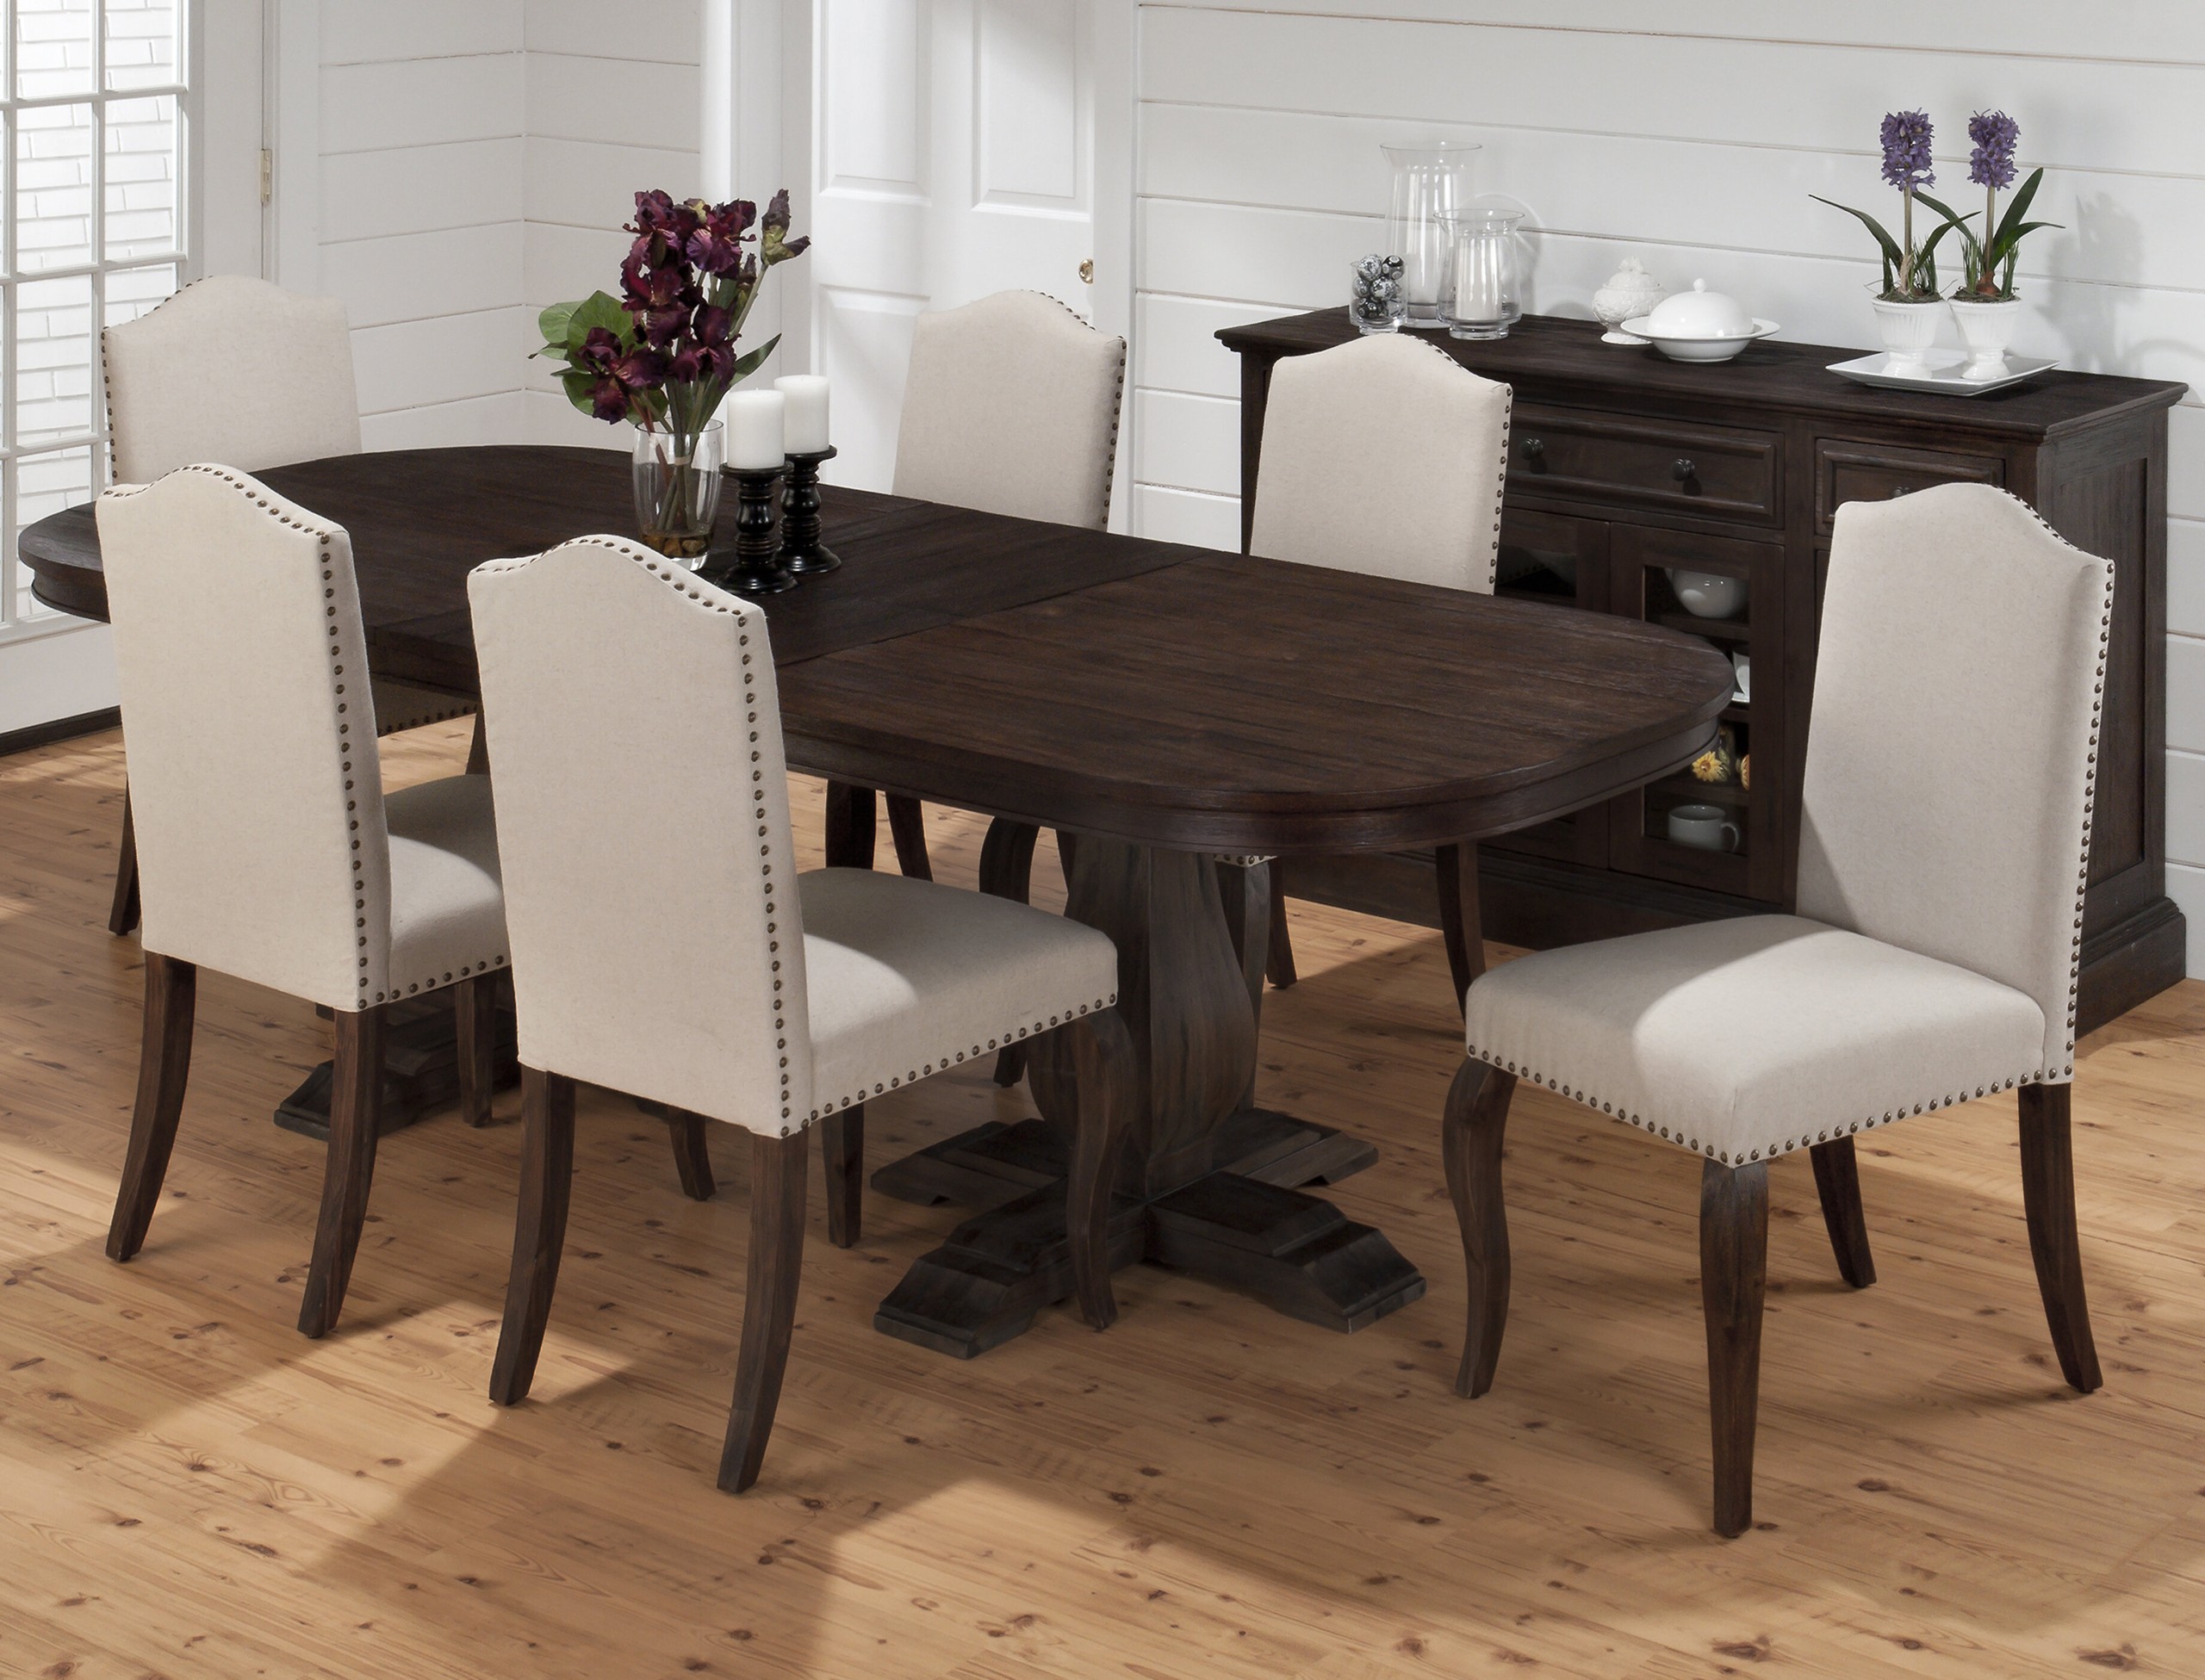 Grand Terrace Extendable Dining Table